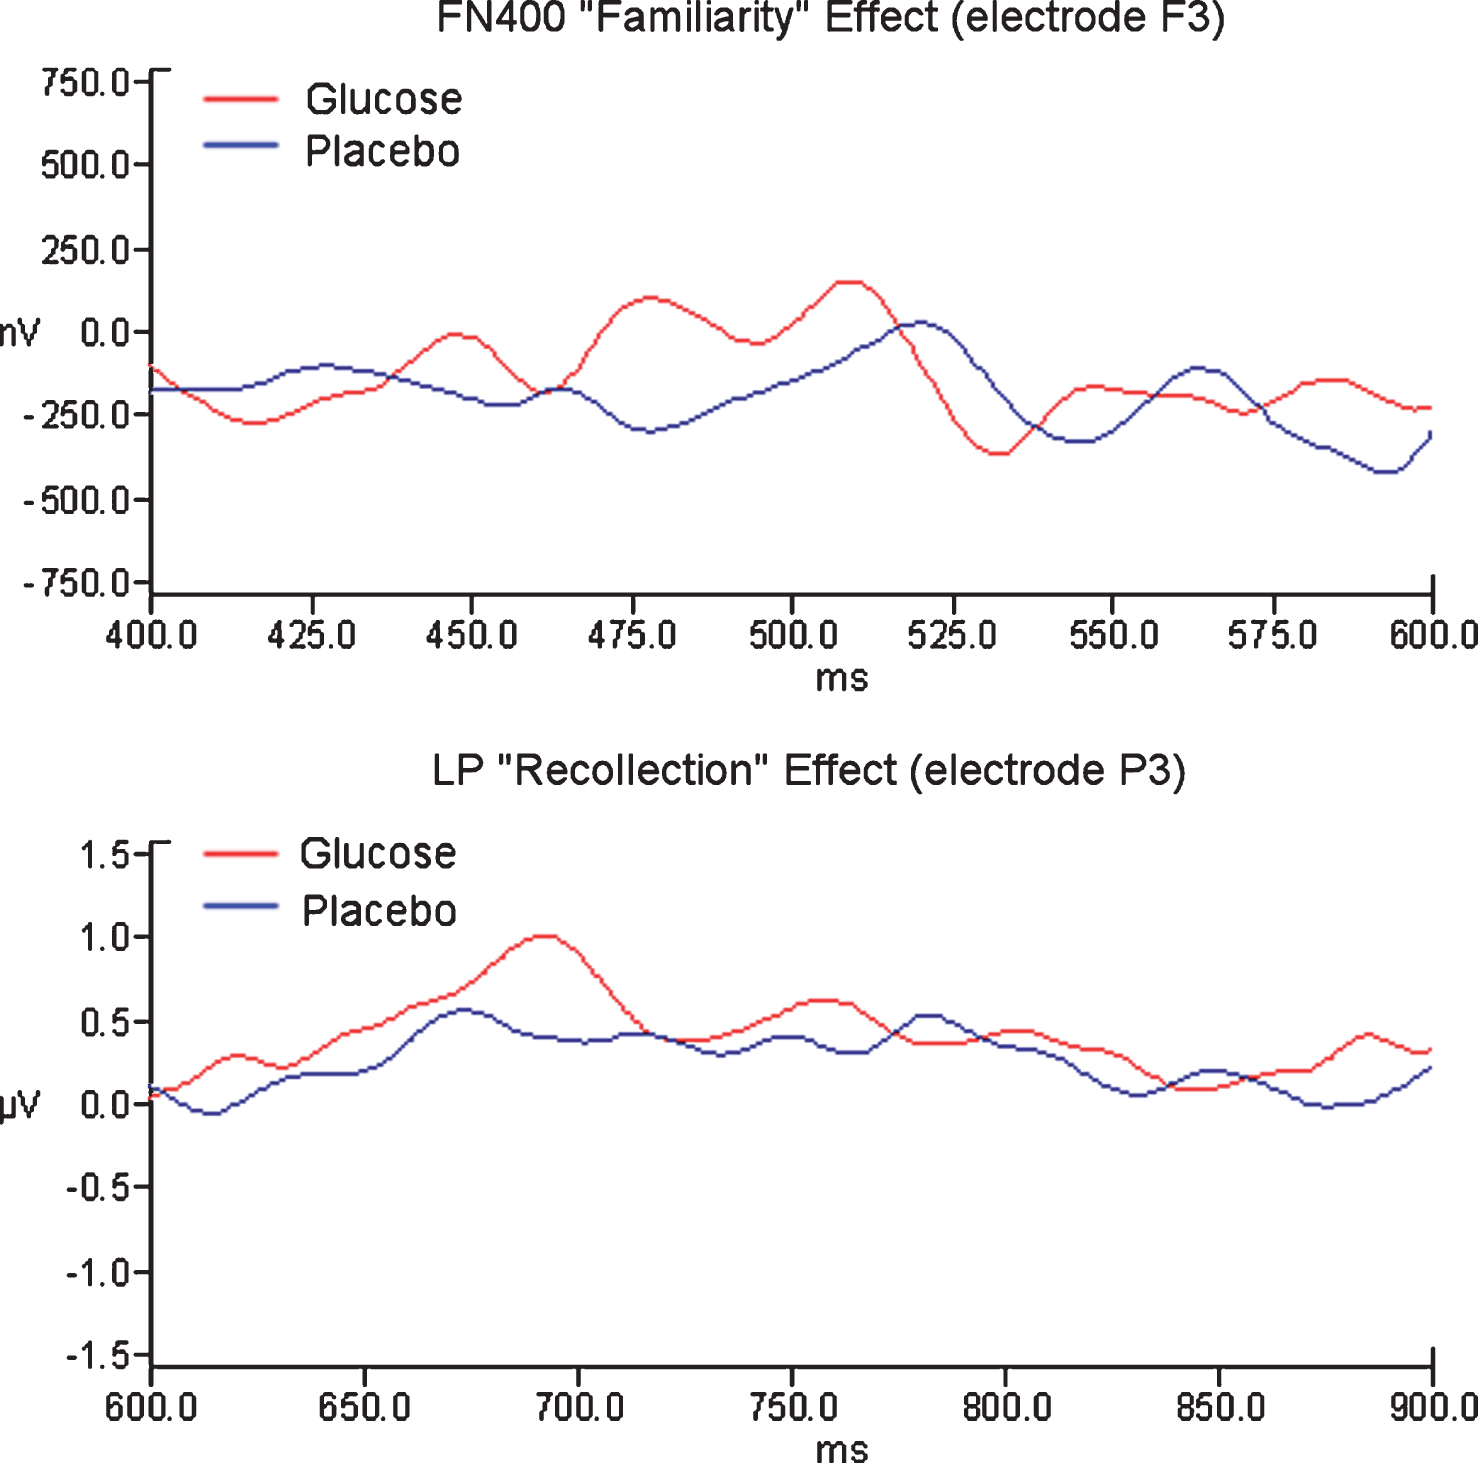 Grand average ERP Glucose old [correct] and Placebo old [correct] for frontal and parietal sites.